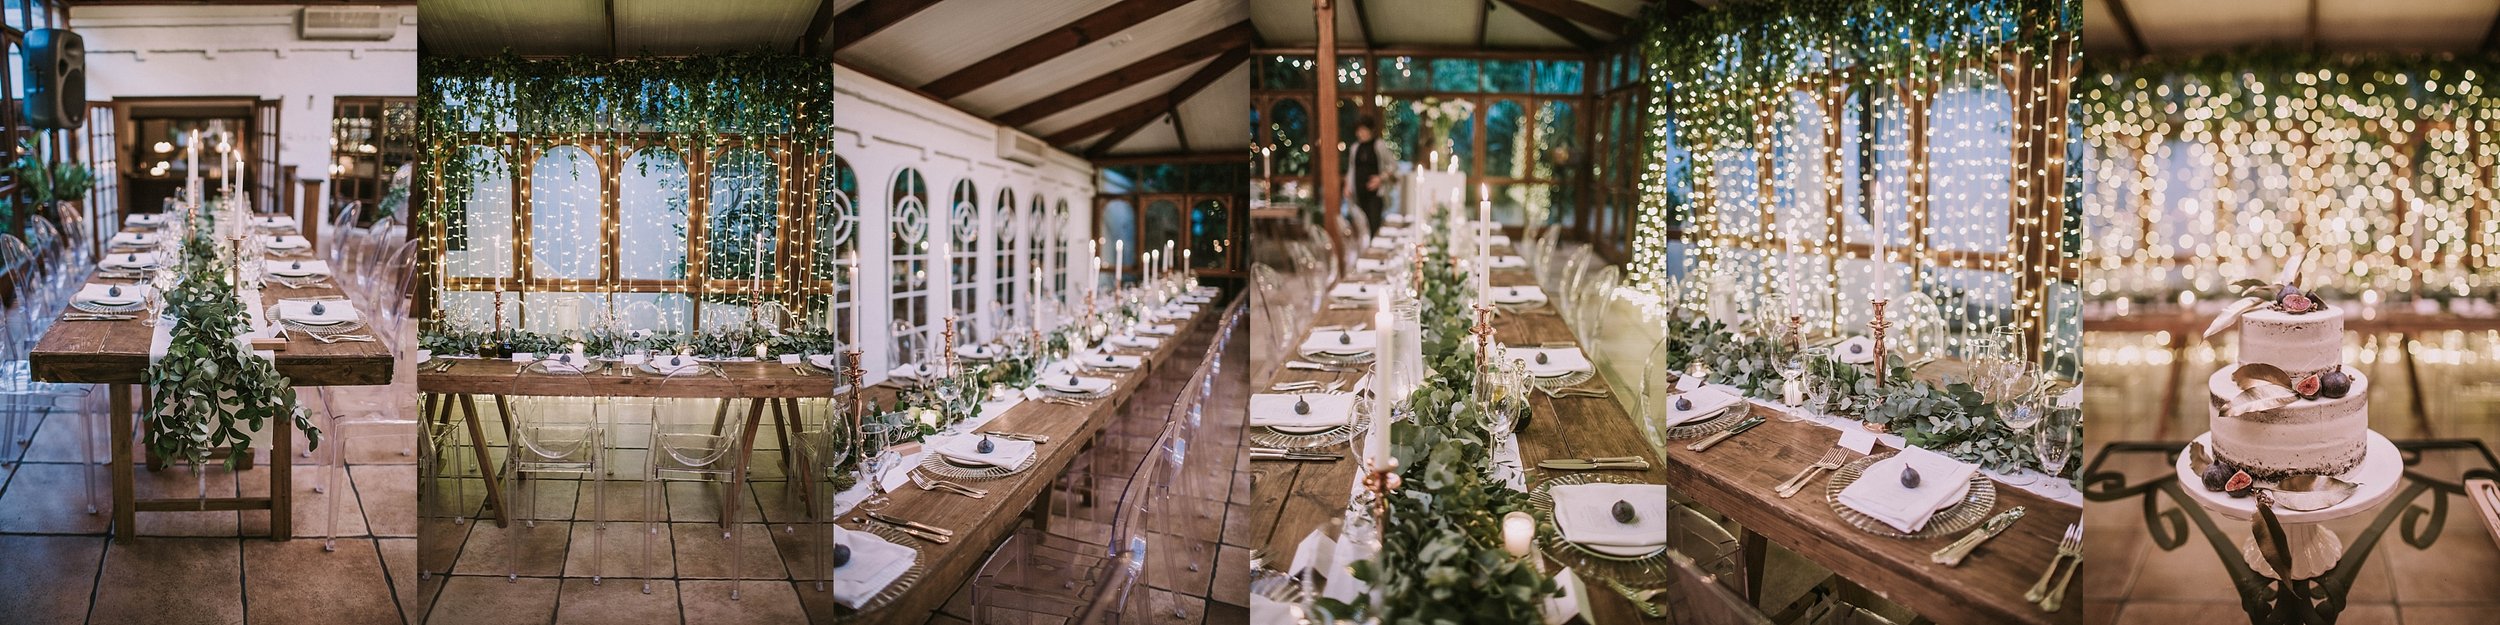 Wedding_Photography_Hunters Country House Plettenbergbay_Rue Kruger_Nathalie _Jaques_6 (2).jpg